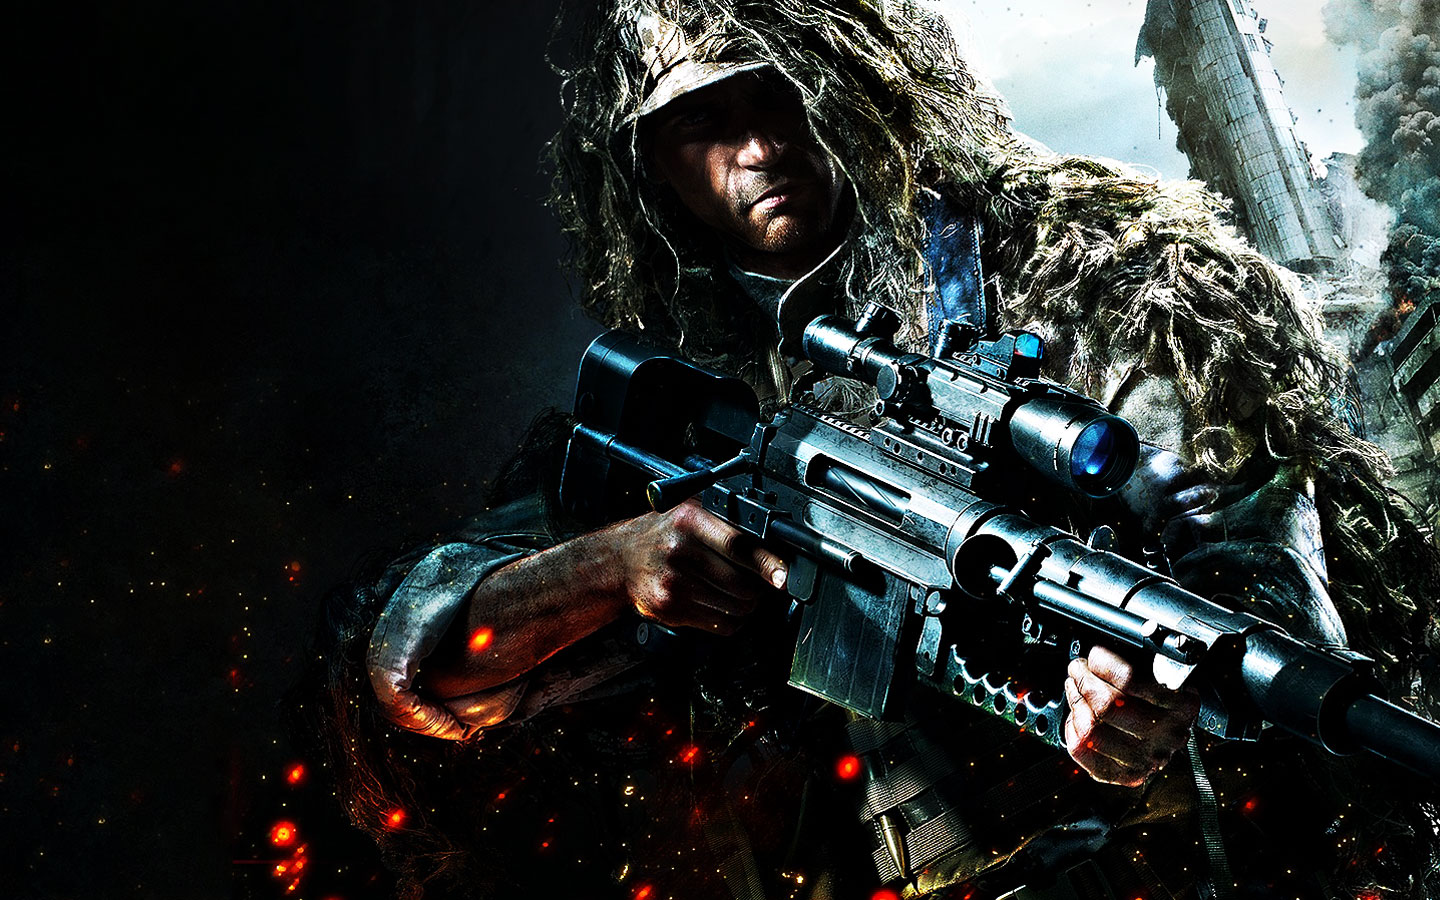 Free download Call of duty ghosts sniper [1440x900] for your Desktop, Mobile & Tablet. Explore Cod Sniper Wallpaper. Cod Sniper Wallpaper, Sniper Wallpaper, Sniper Background